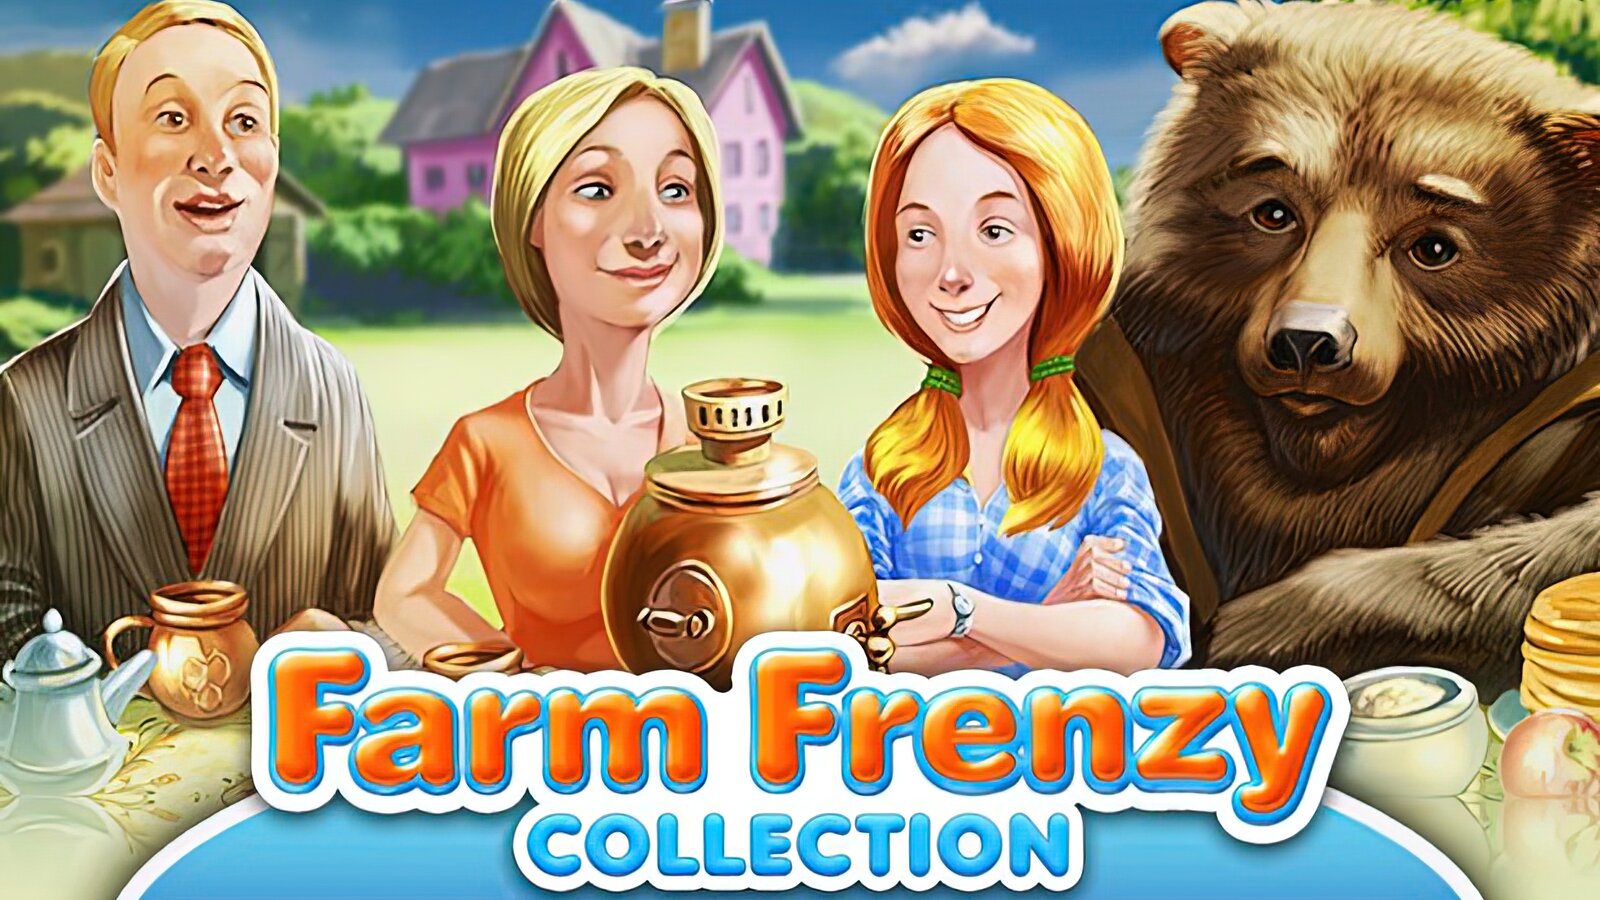 Farm Frenzy - Collection